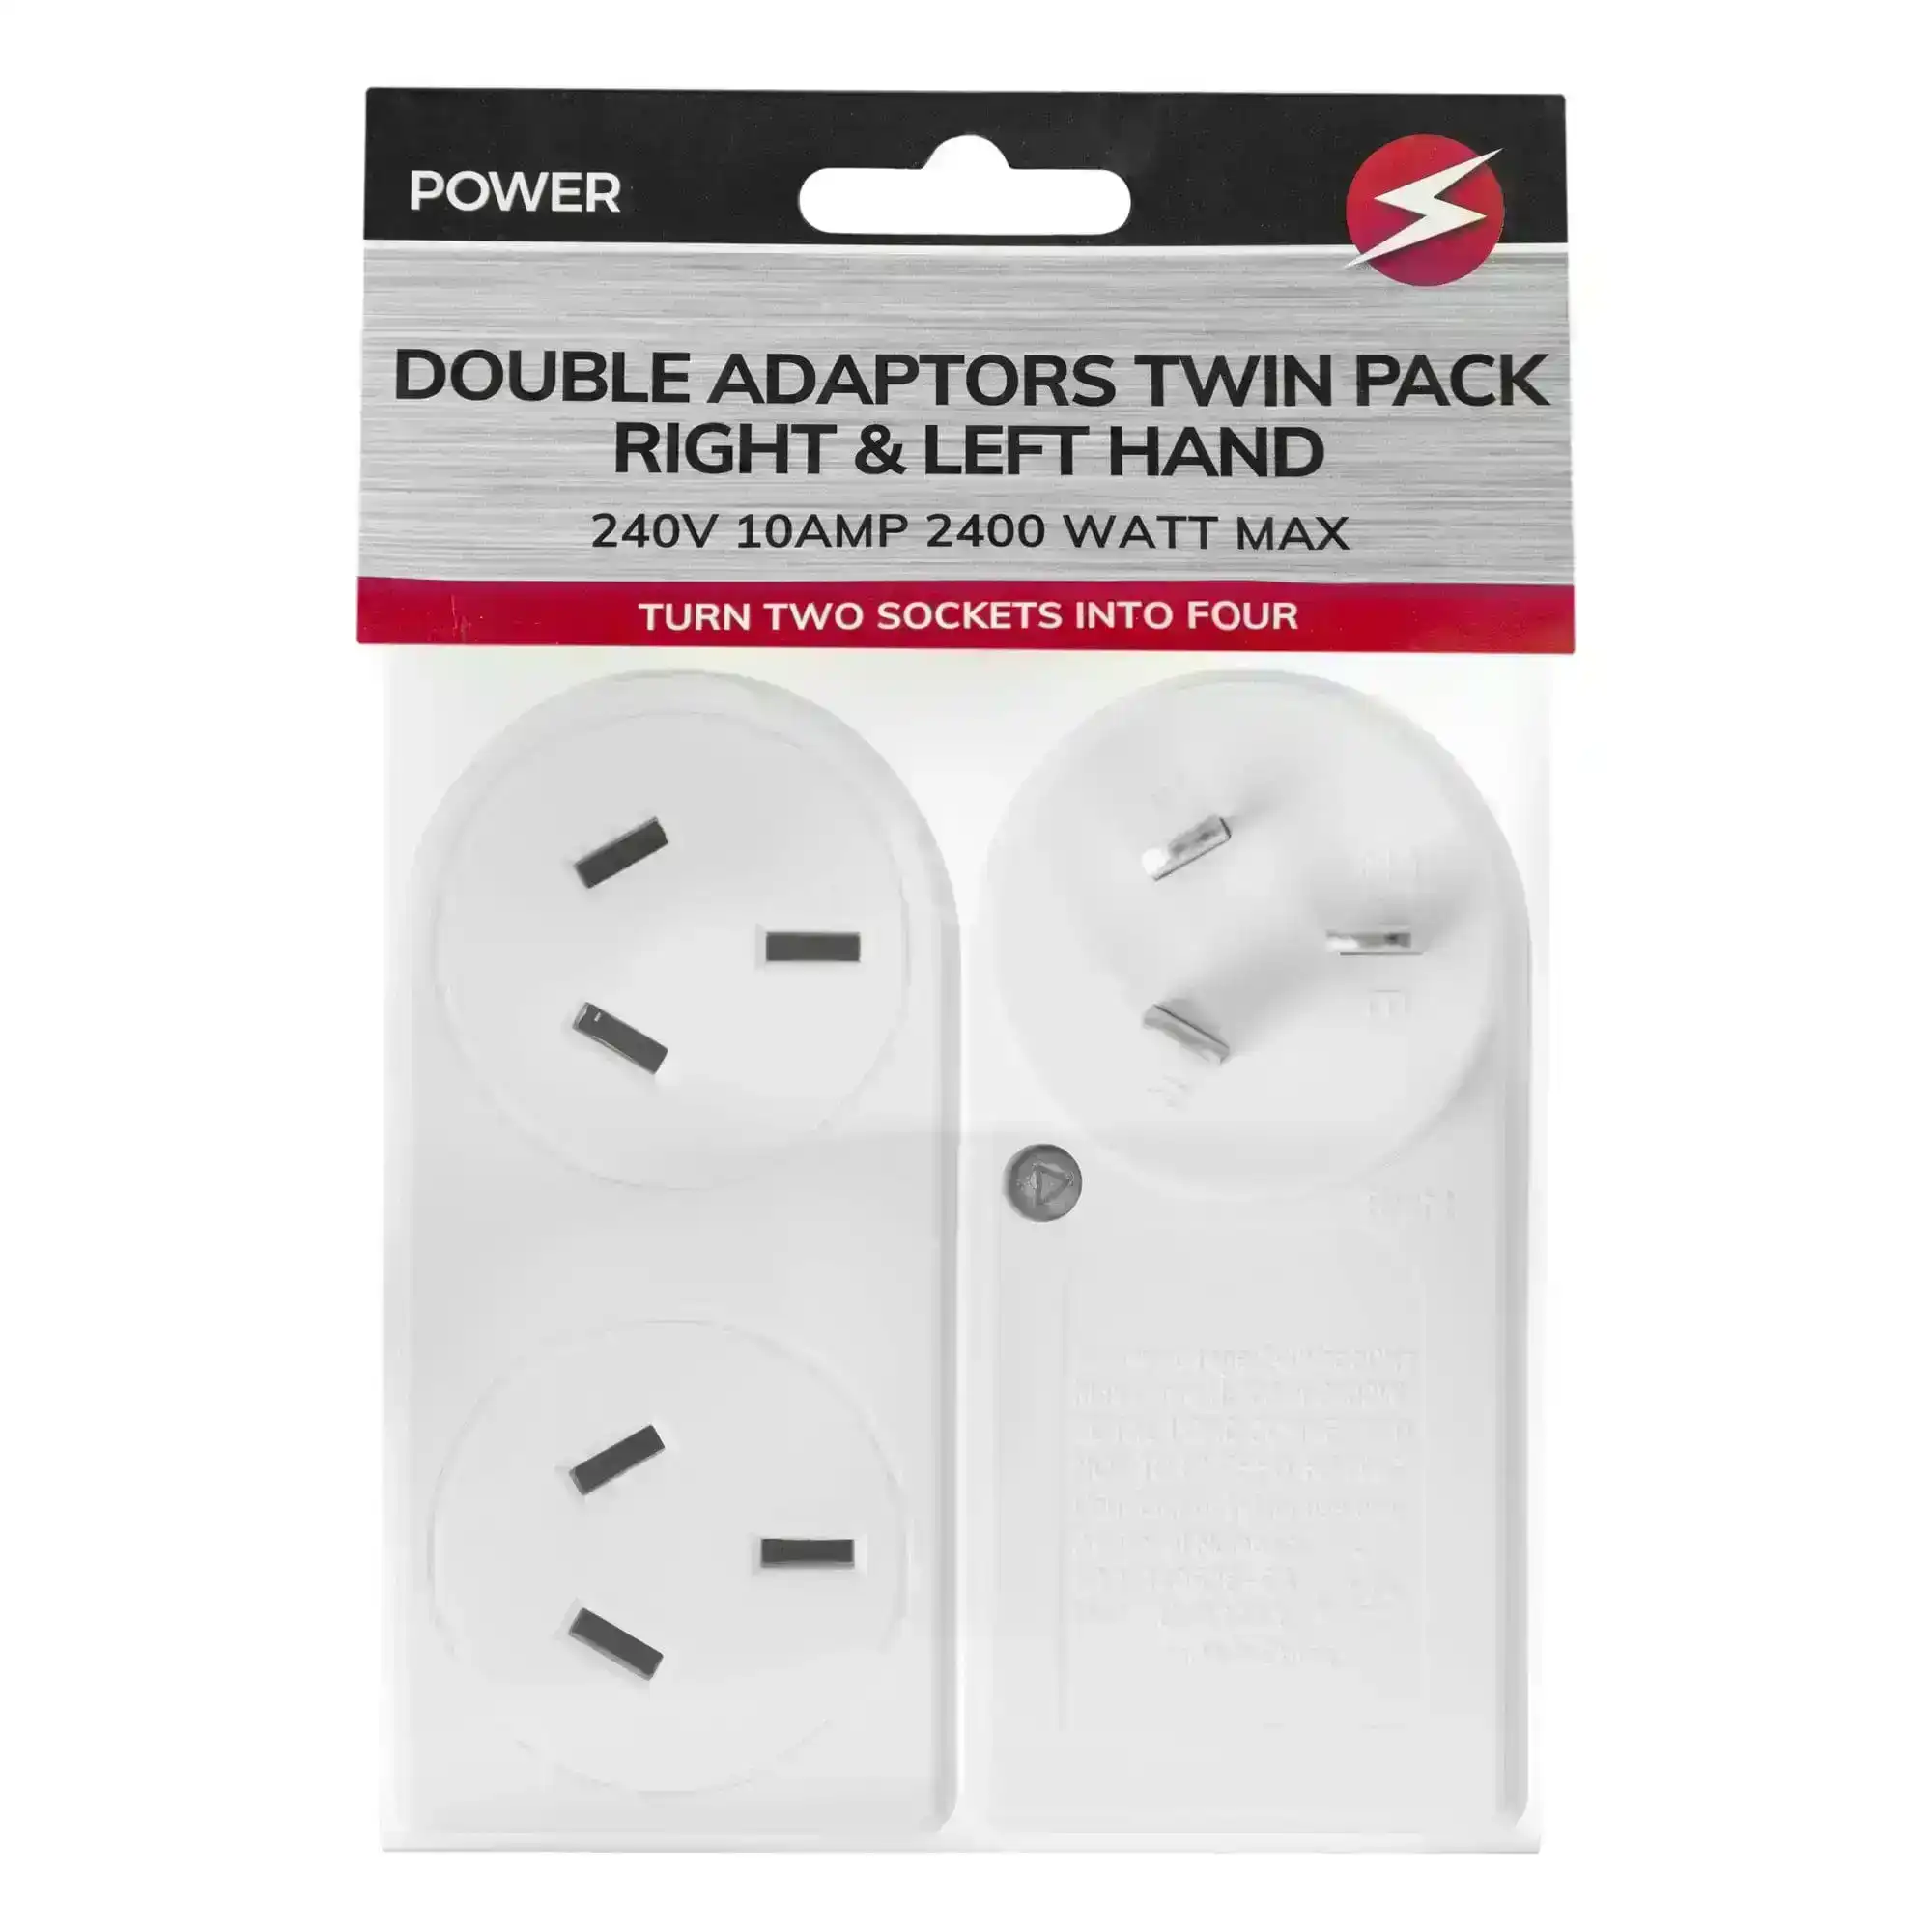 2 Pack x 2400W Double Adapter Right & Left Hand